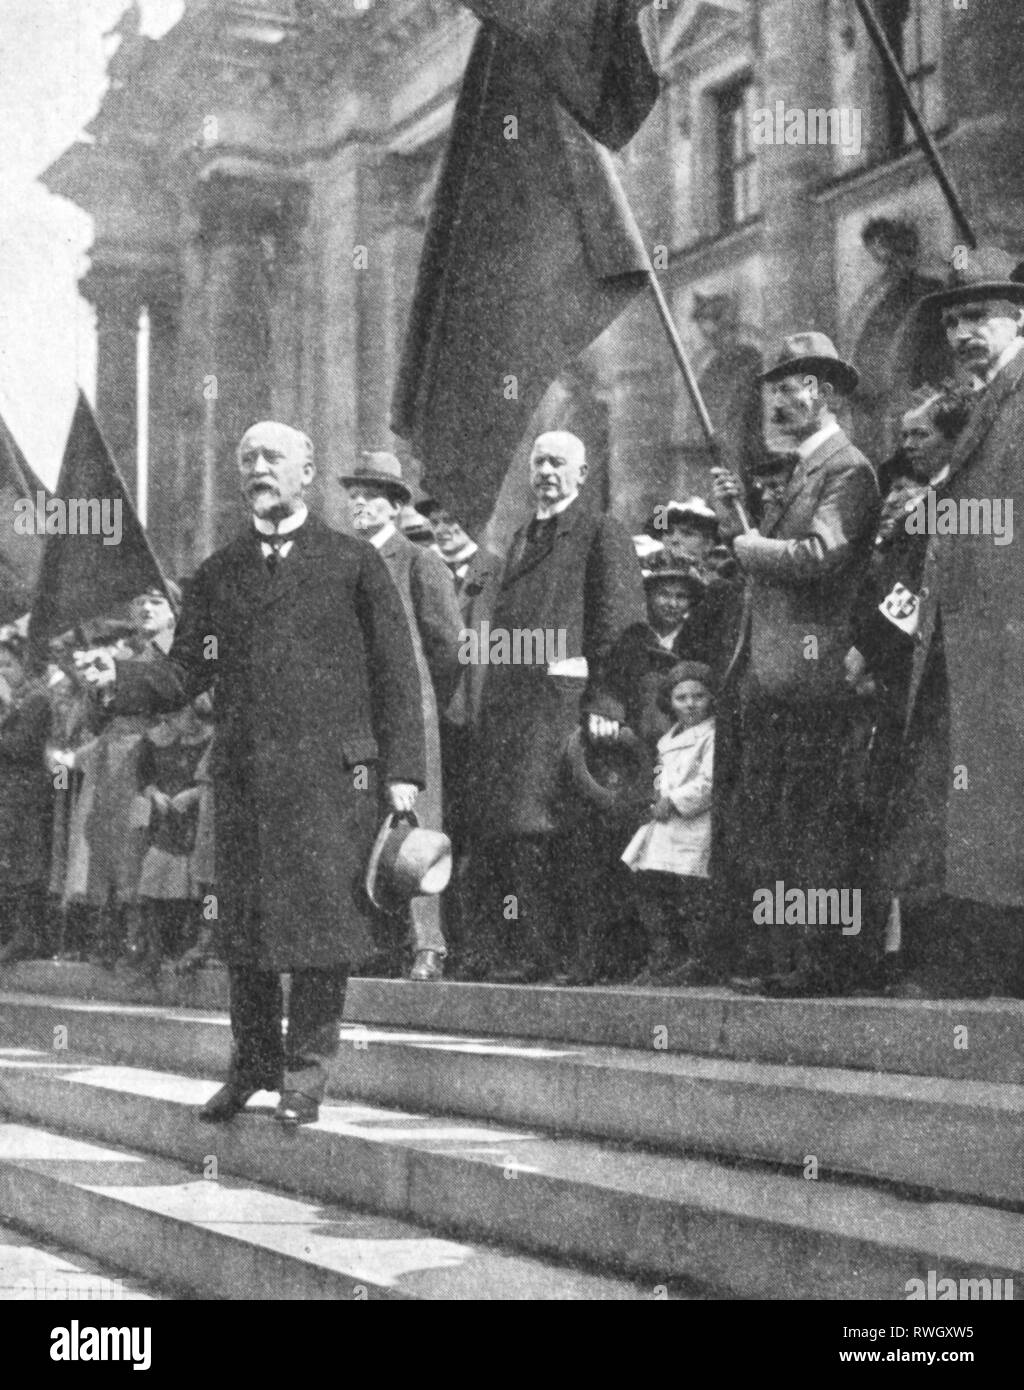 Scheidemann, Philipp, 26.7.1865 - 29.11.1939, German politician (SPD), Reich Prime Minister 13.2. - 20.6.1919, full length, speech in front of the Reichstag, Berlin, February 1919, Additional-Rights-Clearance-Info-Not-Available Stock Photo